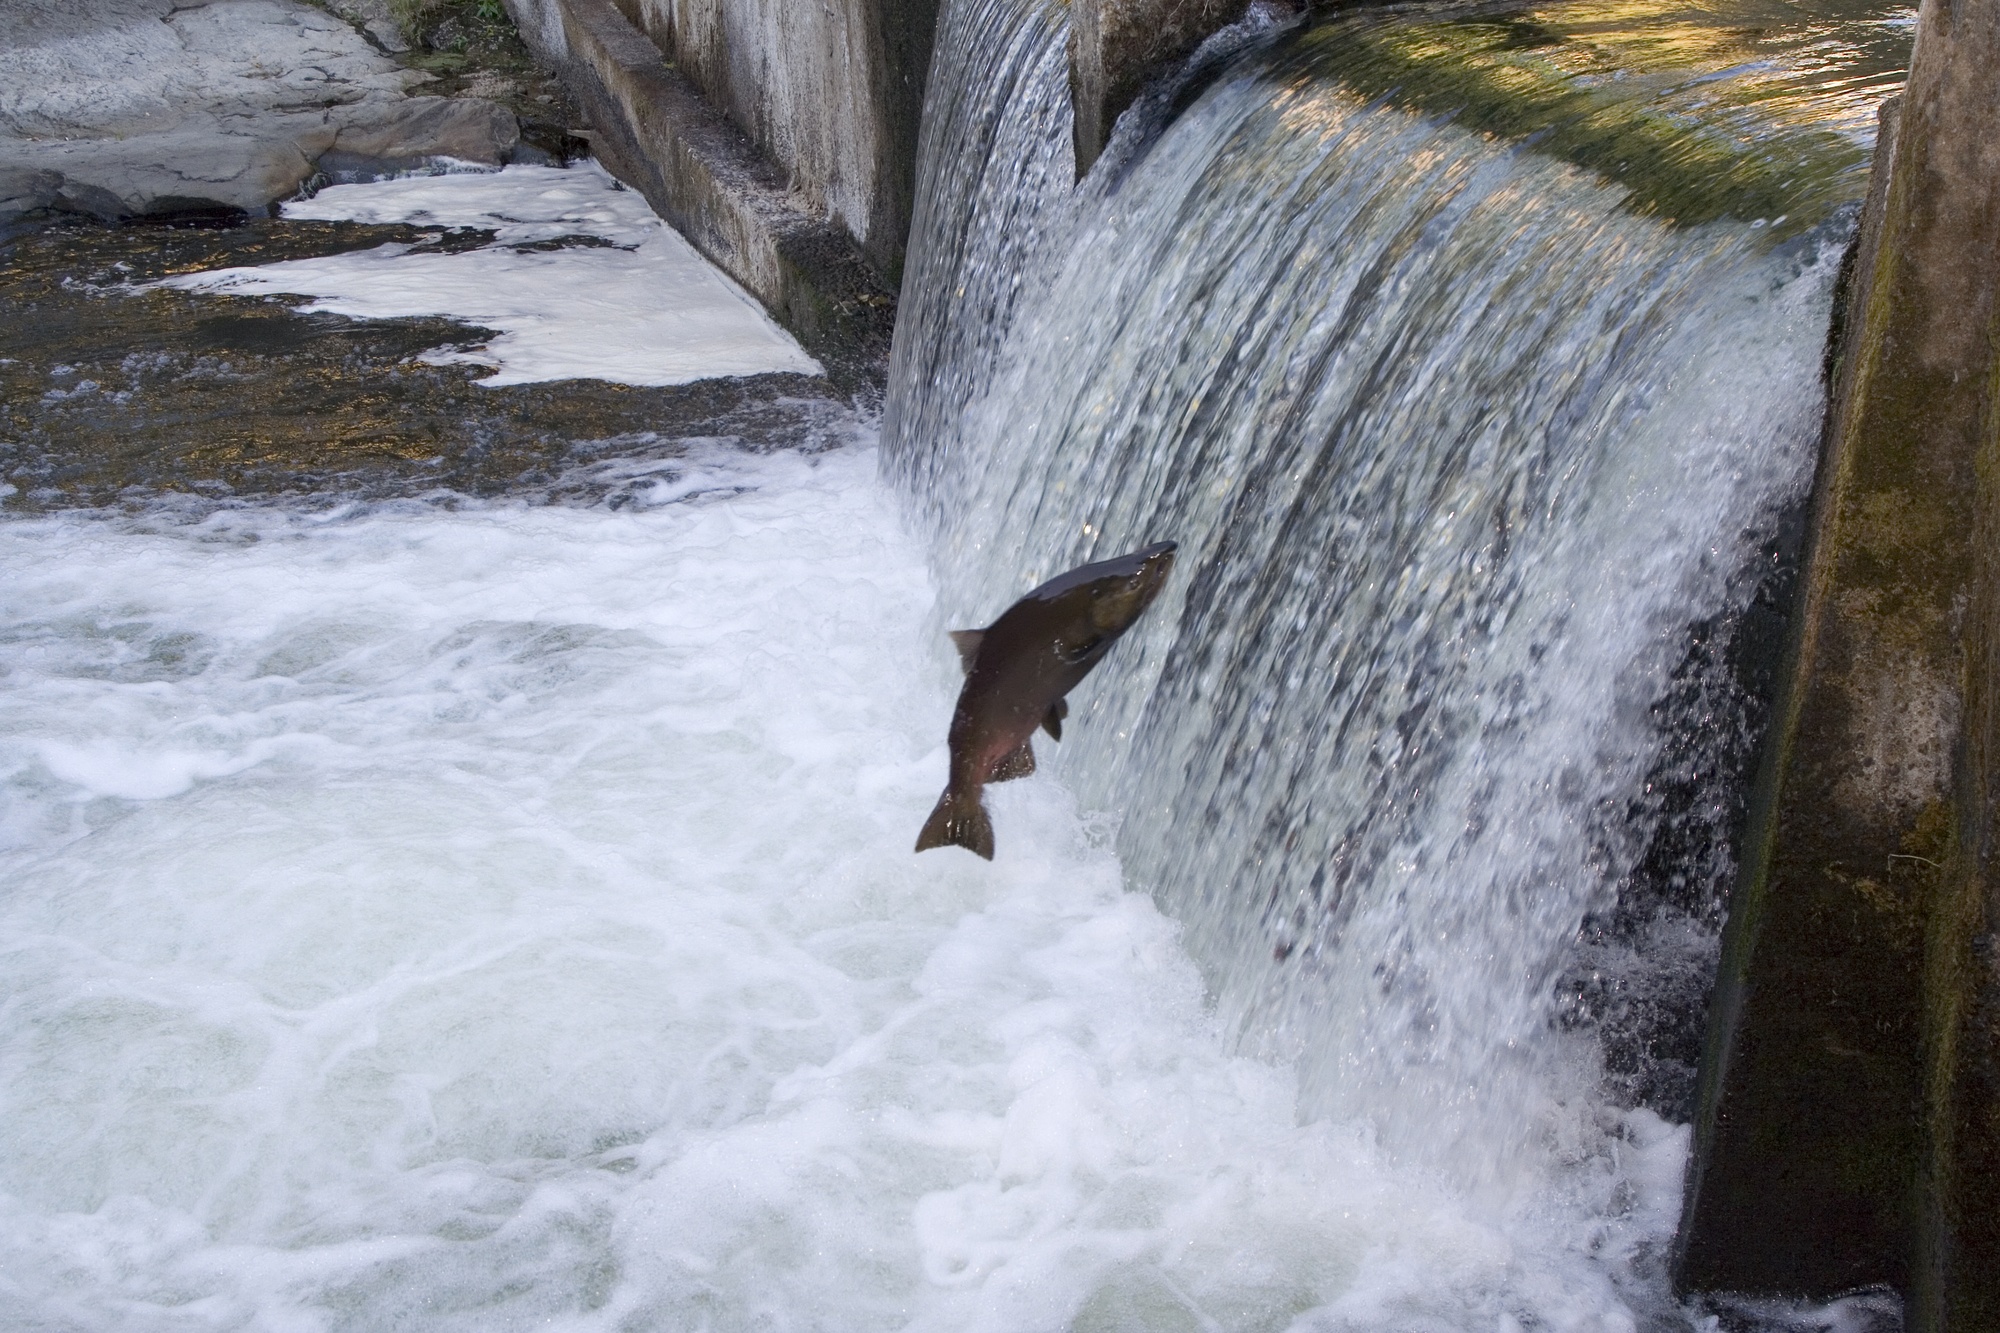 An endangered Chum Salmon, Oncorhynchus keta, (aka. Dog Salmon) attempts to jump a small dam on the Deschutes River in Tumwater Washington. The concrete in the foreground is the opening to a fish ladder.